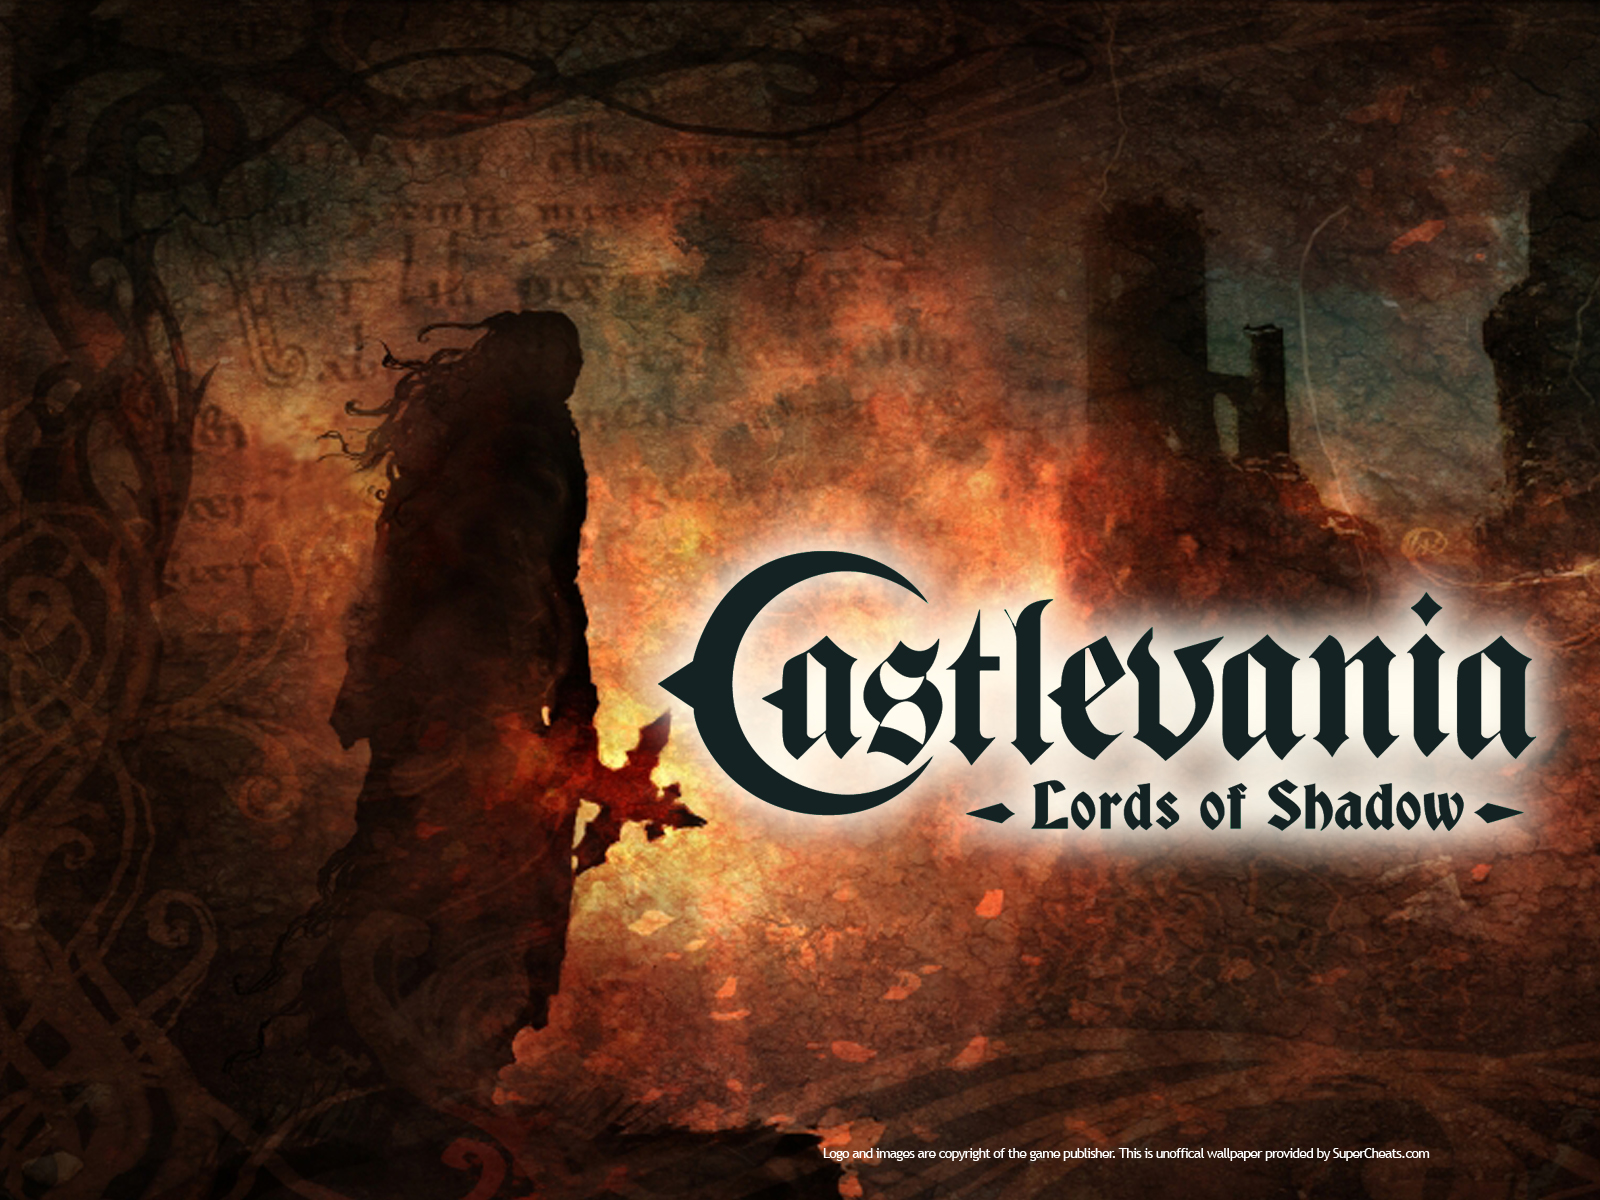 CastlevaniaLords of Shadow HD Wallpapers 1 12